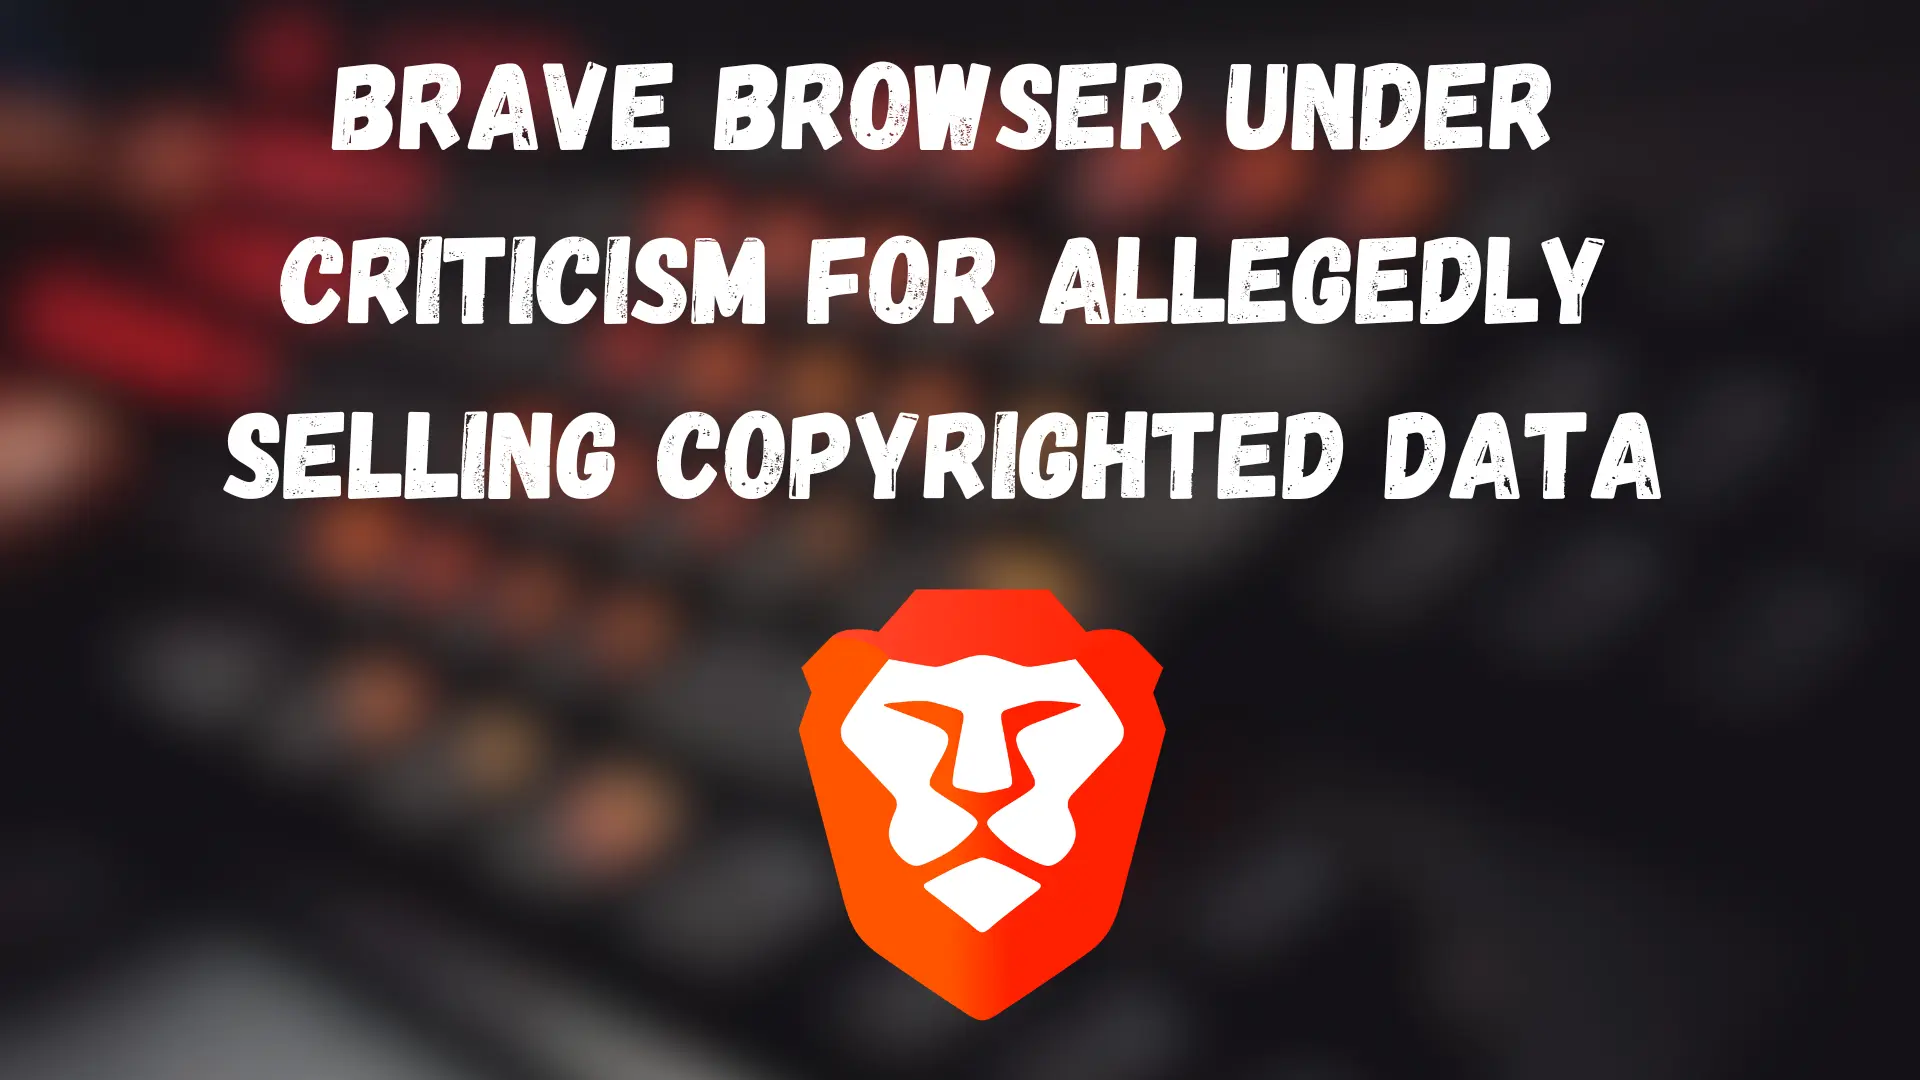 Brave Browser Under Criticism for Allegedly Selling Copyrighted Data